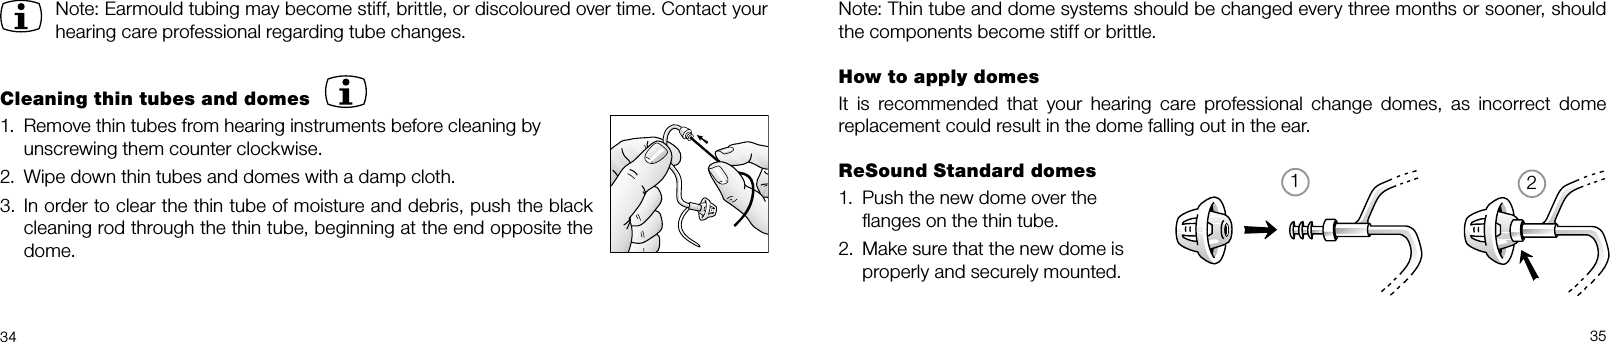 123435Note: Thin tube and dome systems should be changed every three months or sooner, should the components become stiff or brittle.How to apply domesIt  is  recommended  that  your  hearing  care  professional  change  domes,  as  incorrect  dome  replacement could result in the dome falling out in the ear.ReSound Standard domesPush the new dome over the  1. ﬂanges on the thin tube.Make sure that the new dome is 2. properly and securely mounted.Note: Earmould tubing may become stiff, brittle, or discoloured over time. Contact your hearing care professional regarding tube changes.Cleaning thin tubes and domesRemove thin tubes from hearing instruments before cleaning by  1. unscrewing them counter clockwise.Wipe down thin tubes and domes with a damp cloth.2. In order to clear the thin tube of moisture and debris, push the black 3. cleaning rod through the thin tube, beginning at the end opposite the dome.